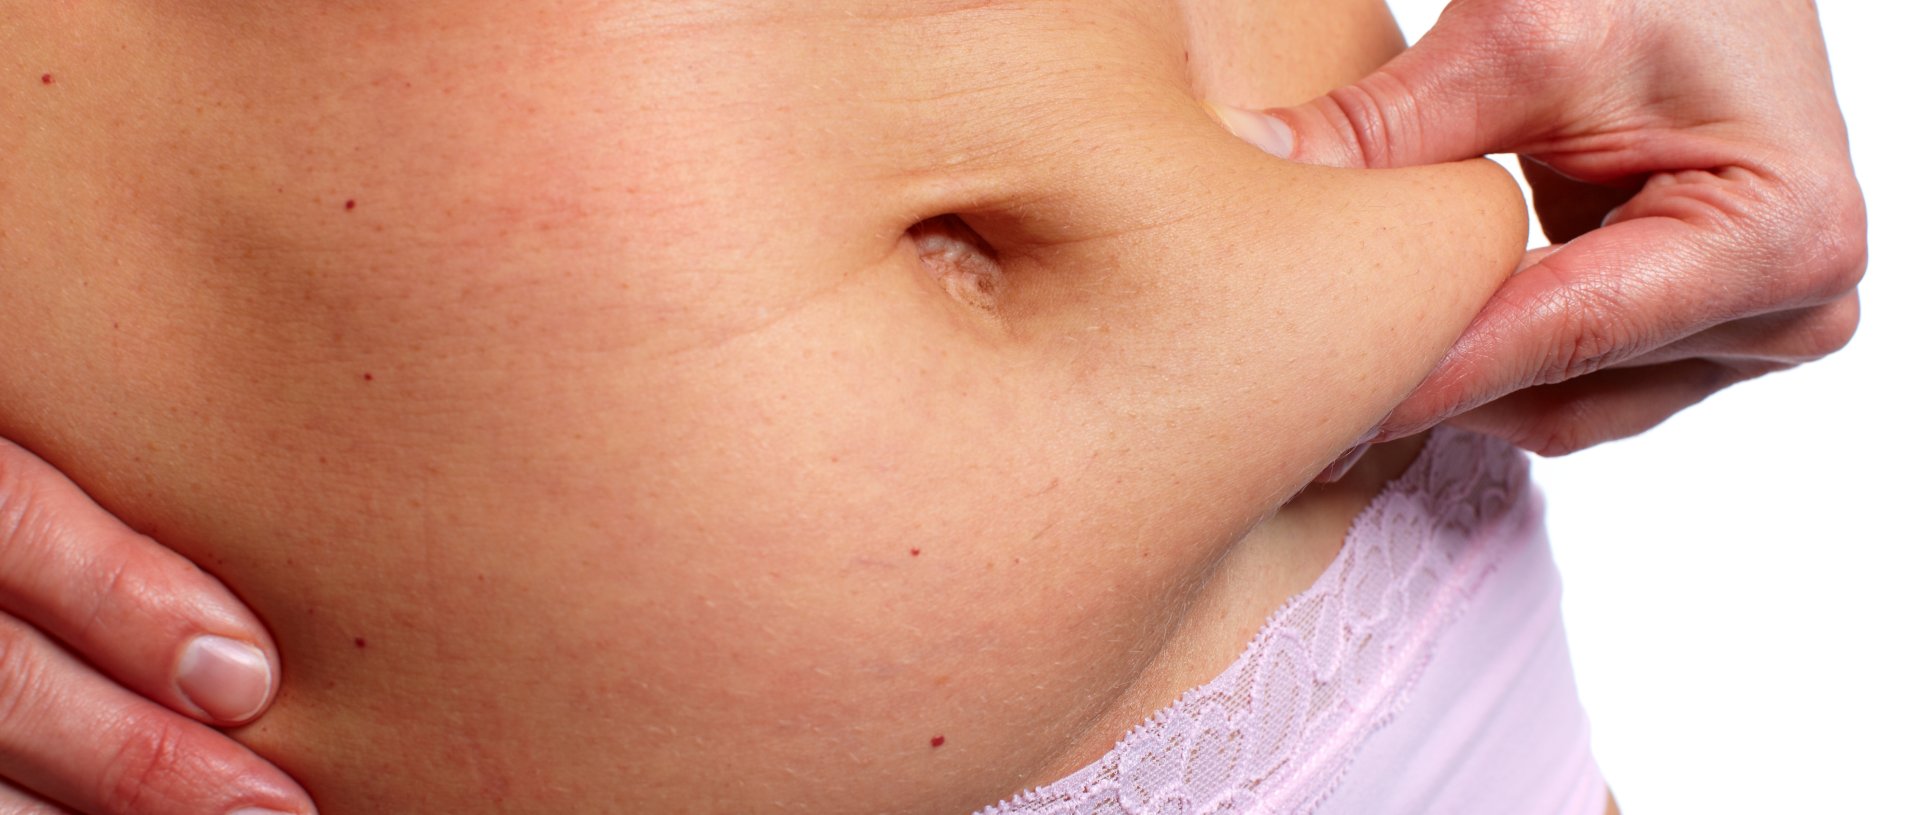 woman touches the skin on her belly